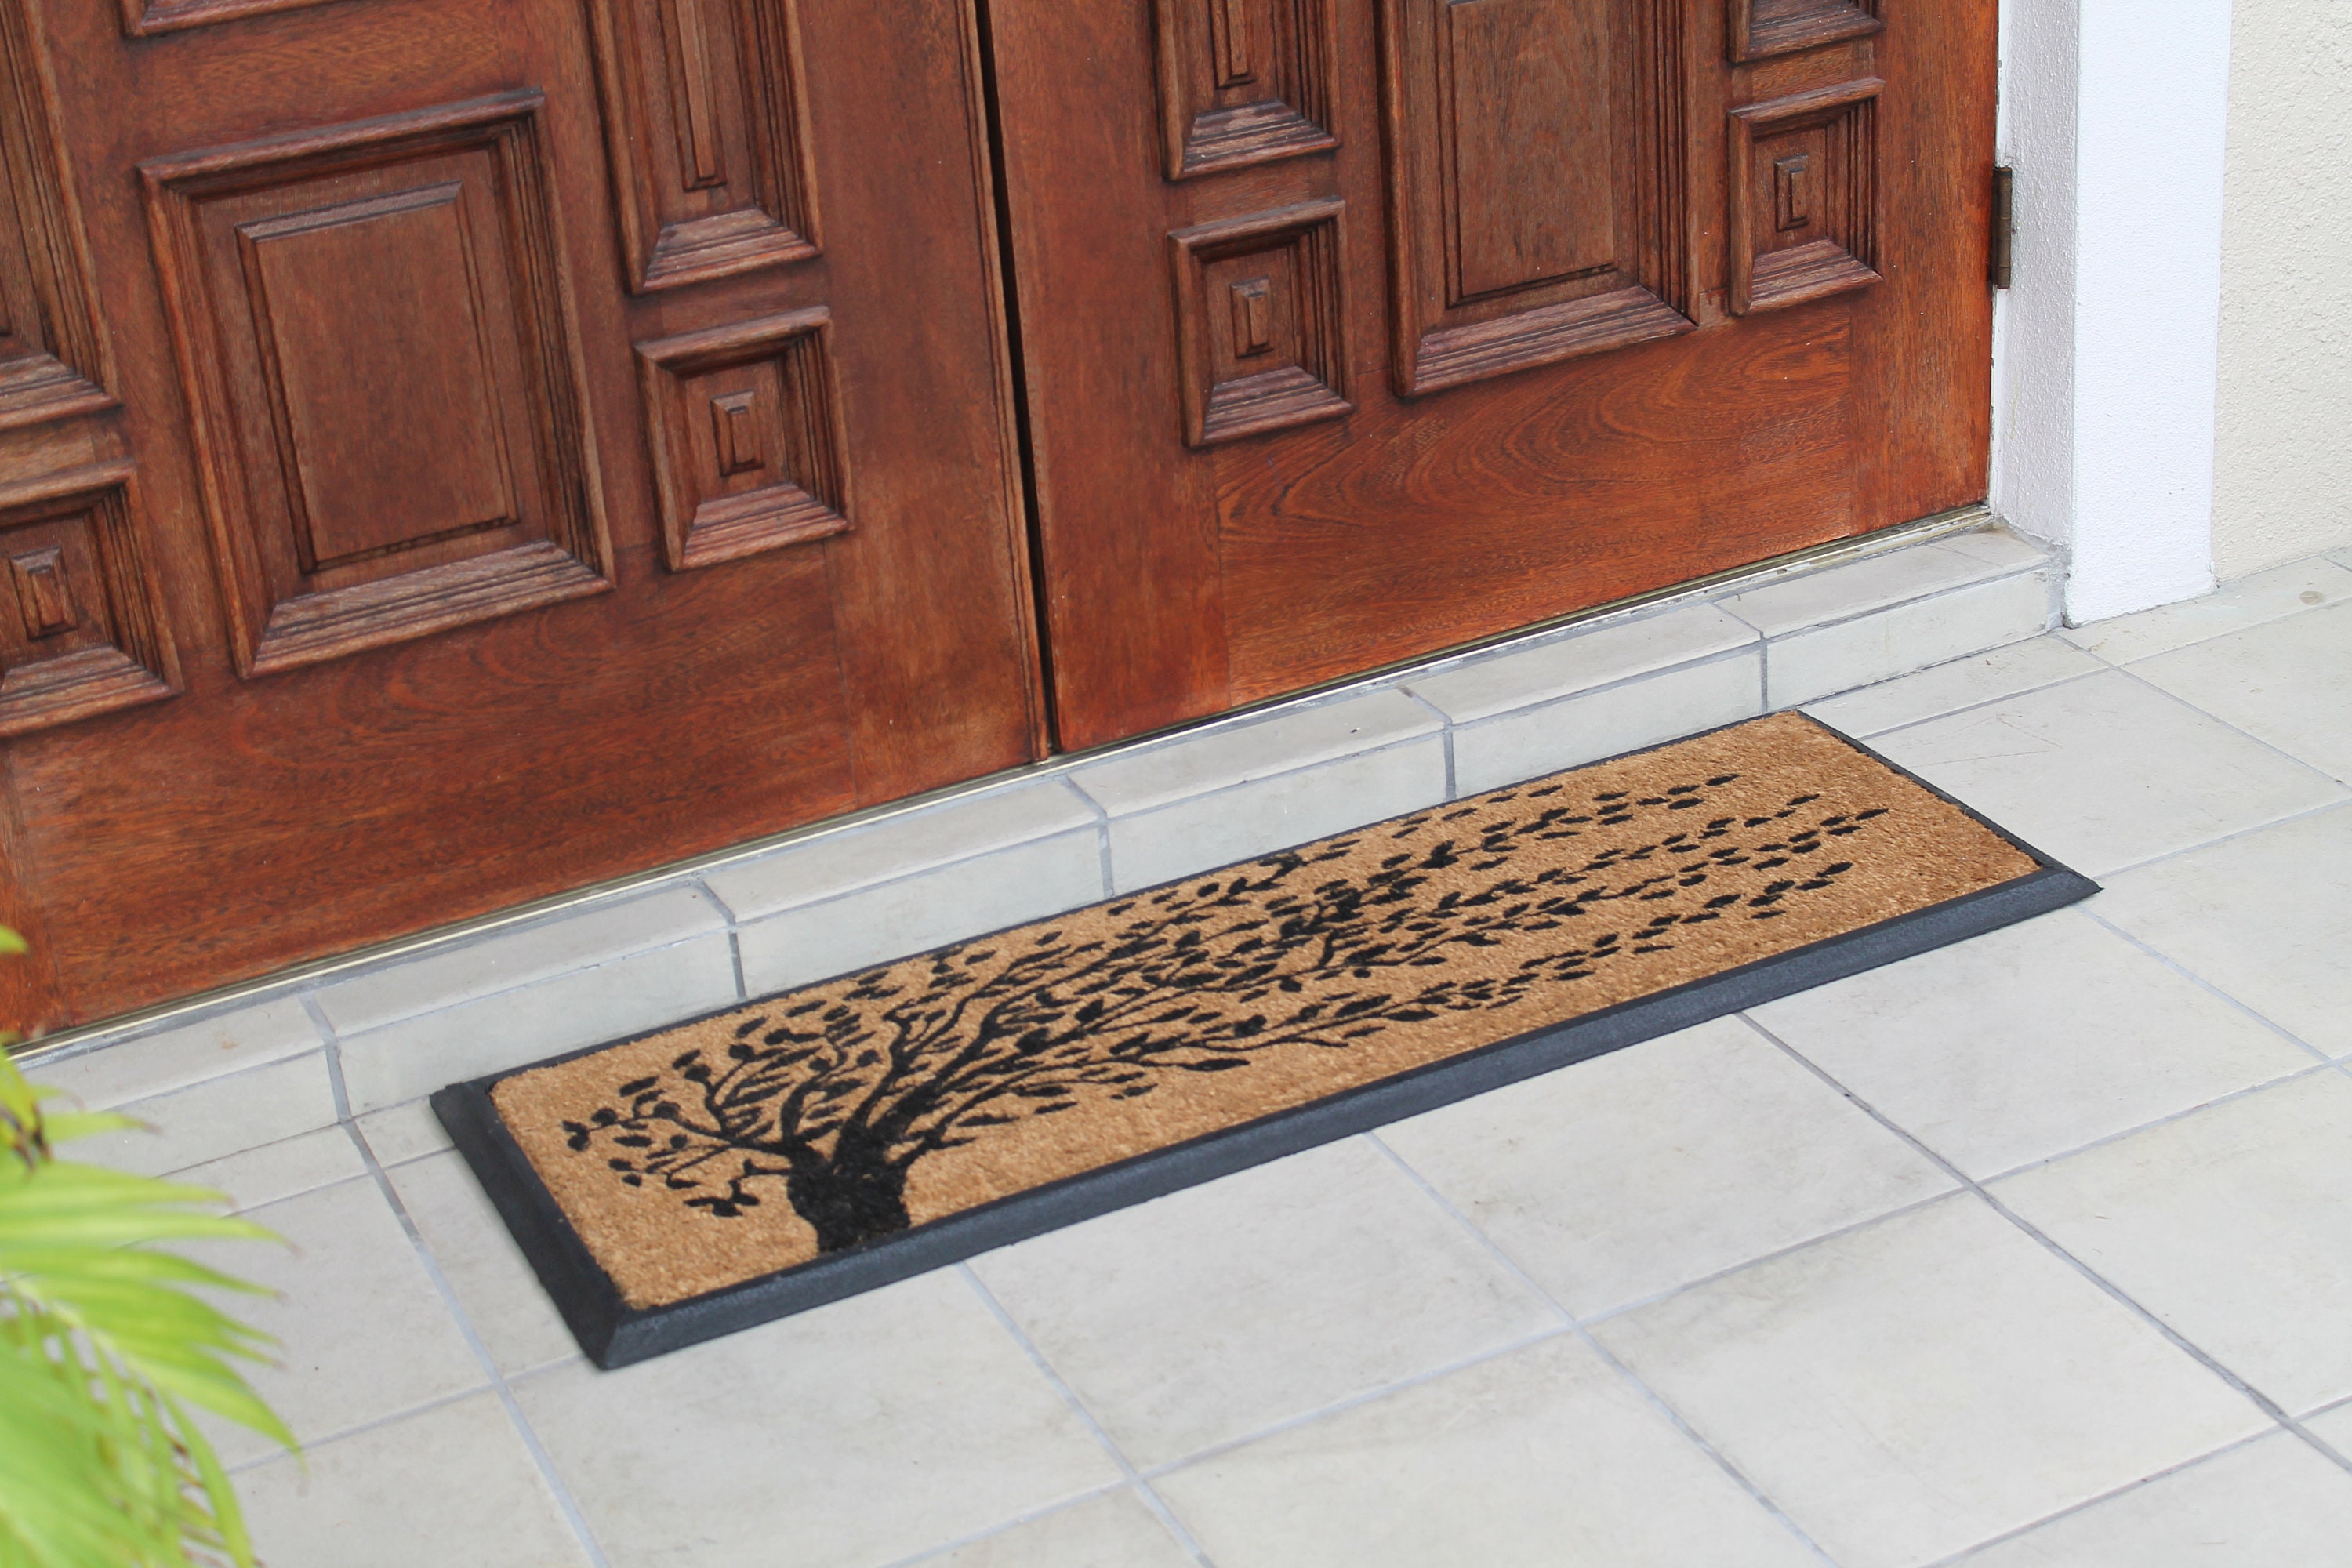 A1 Home Collections Large Outdoor Floor Mat, Natural Rubber, 30 in x 48 in, Ideal for Entryway, Scrapes Shoes Clean of Dirt & Grime, Heavy Duty Door